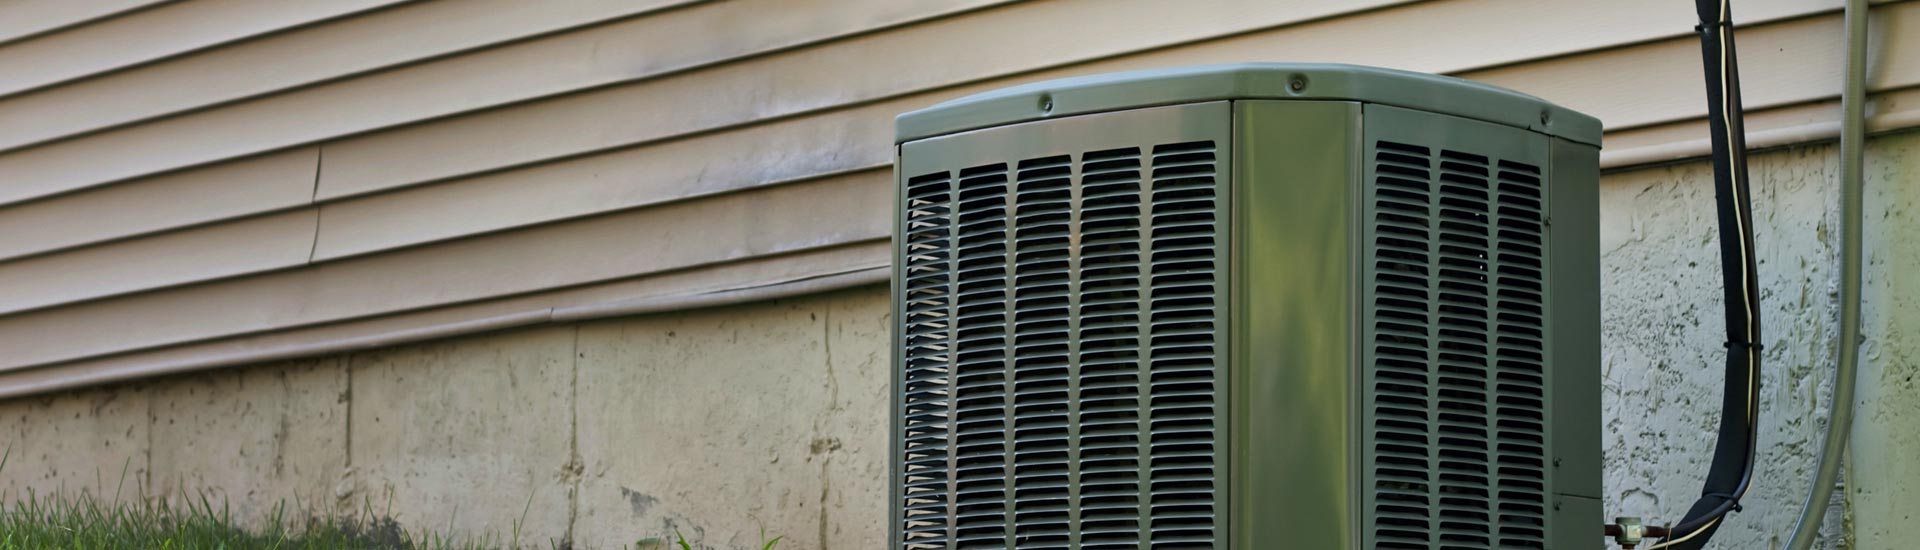 Outdoor Residential AC Unit